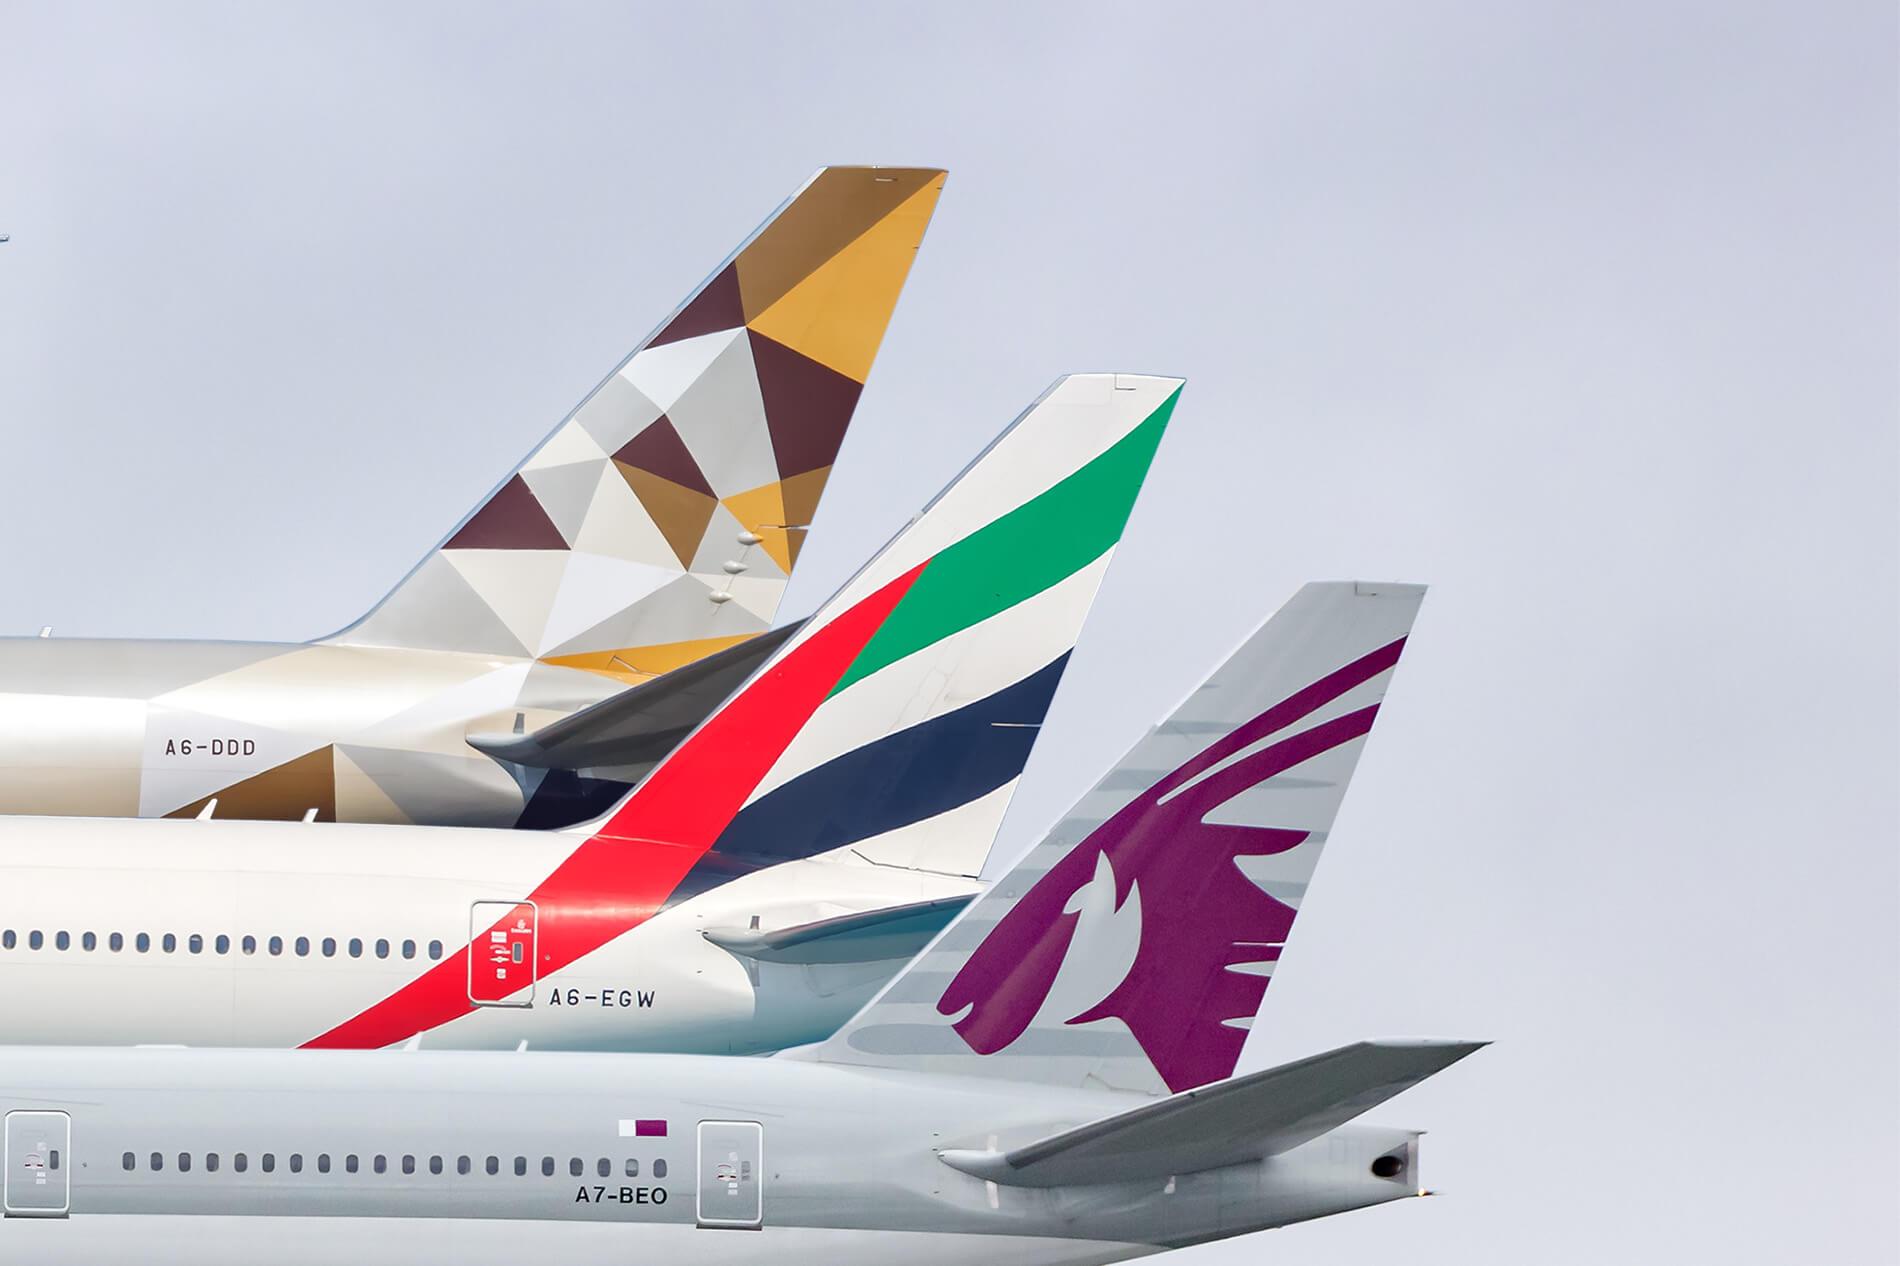 Emirates and Etihad join forces to offer hassle-free UAE adventures